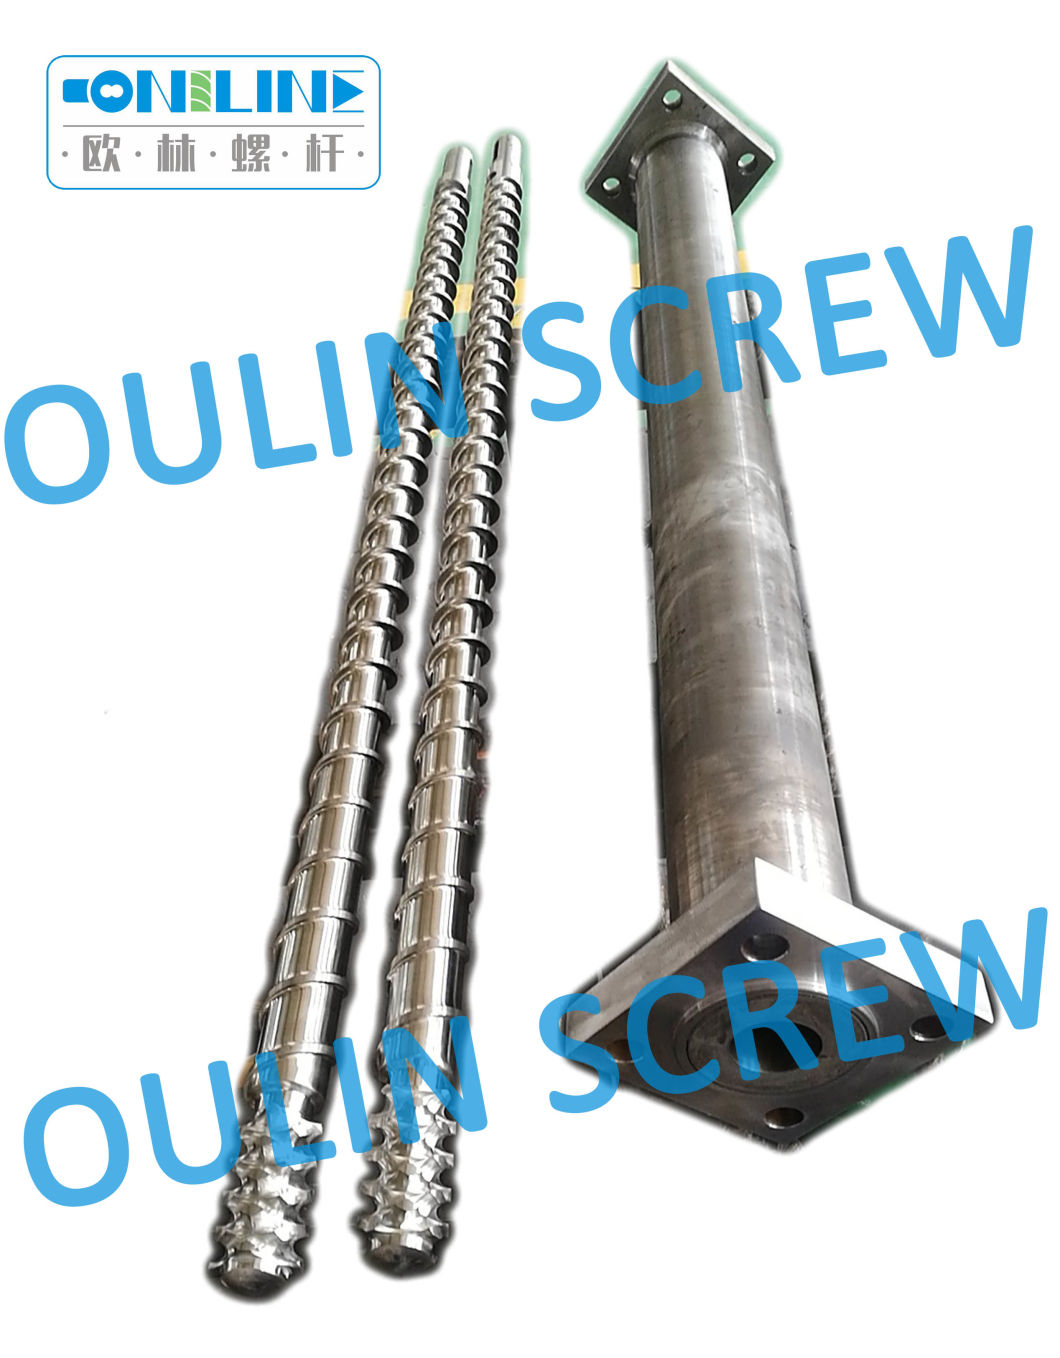 Desing Screw and Barrel for Film Blowing Machine